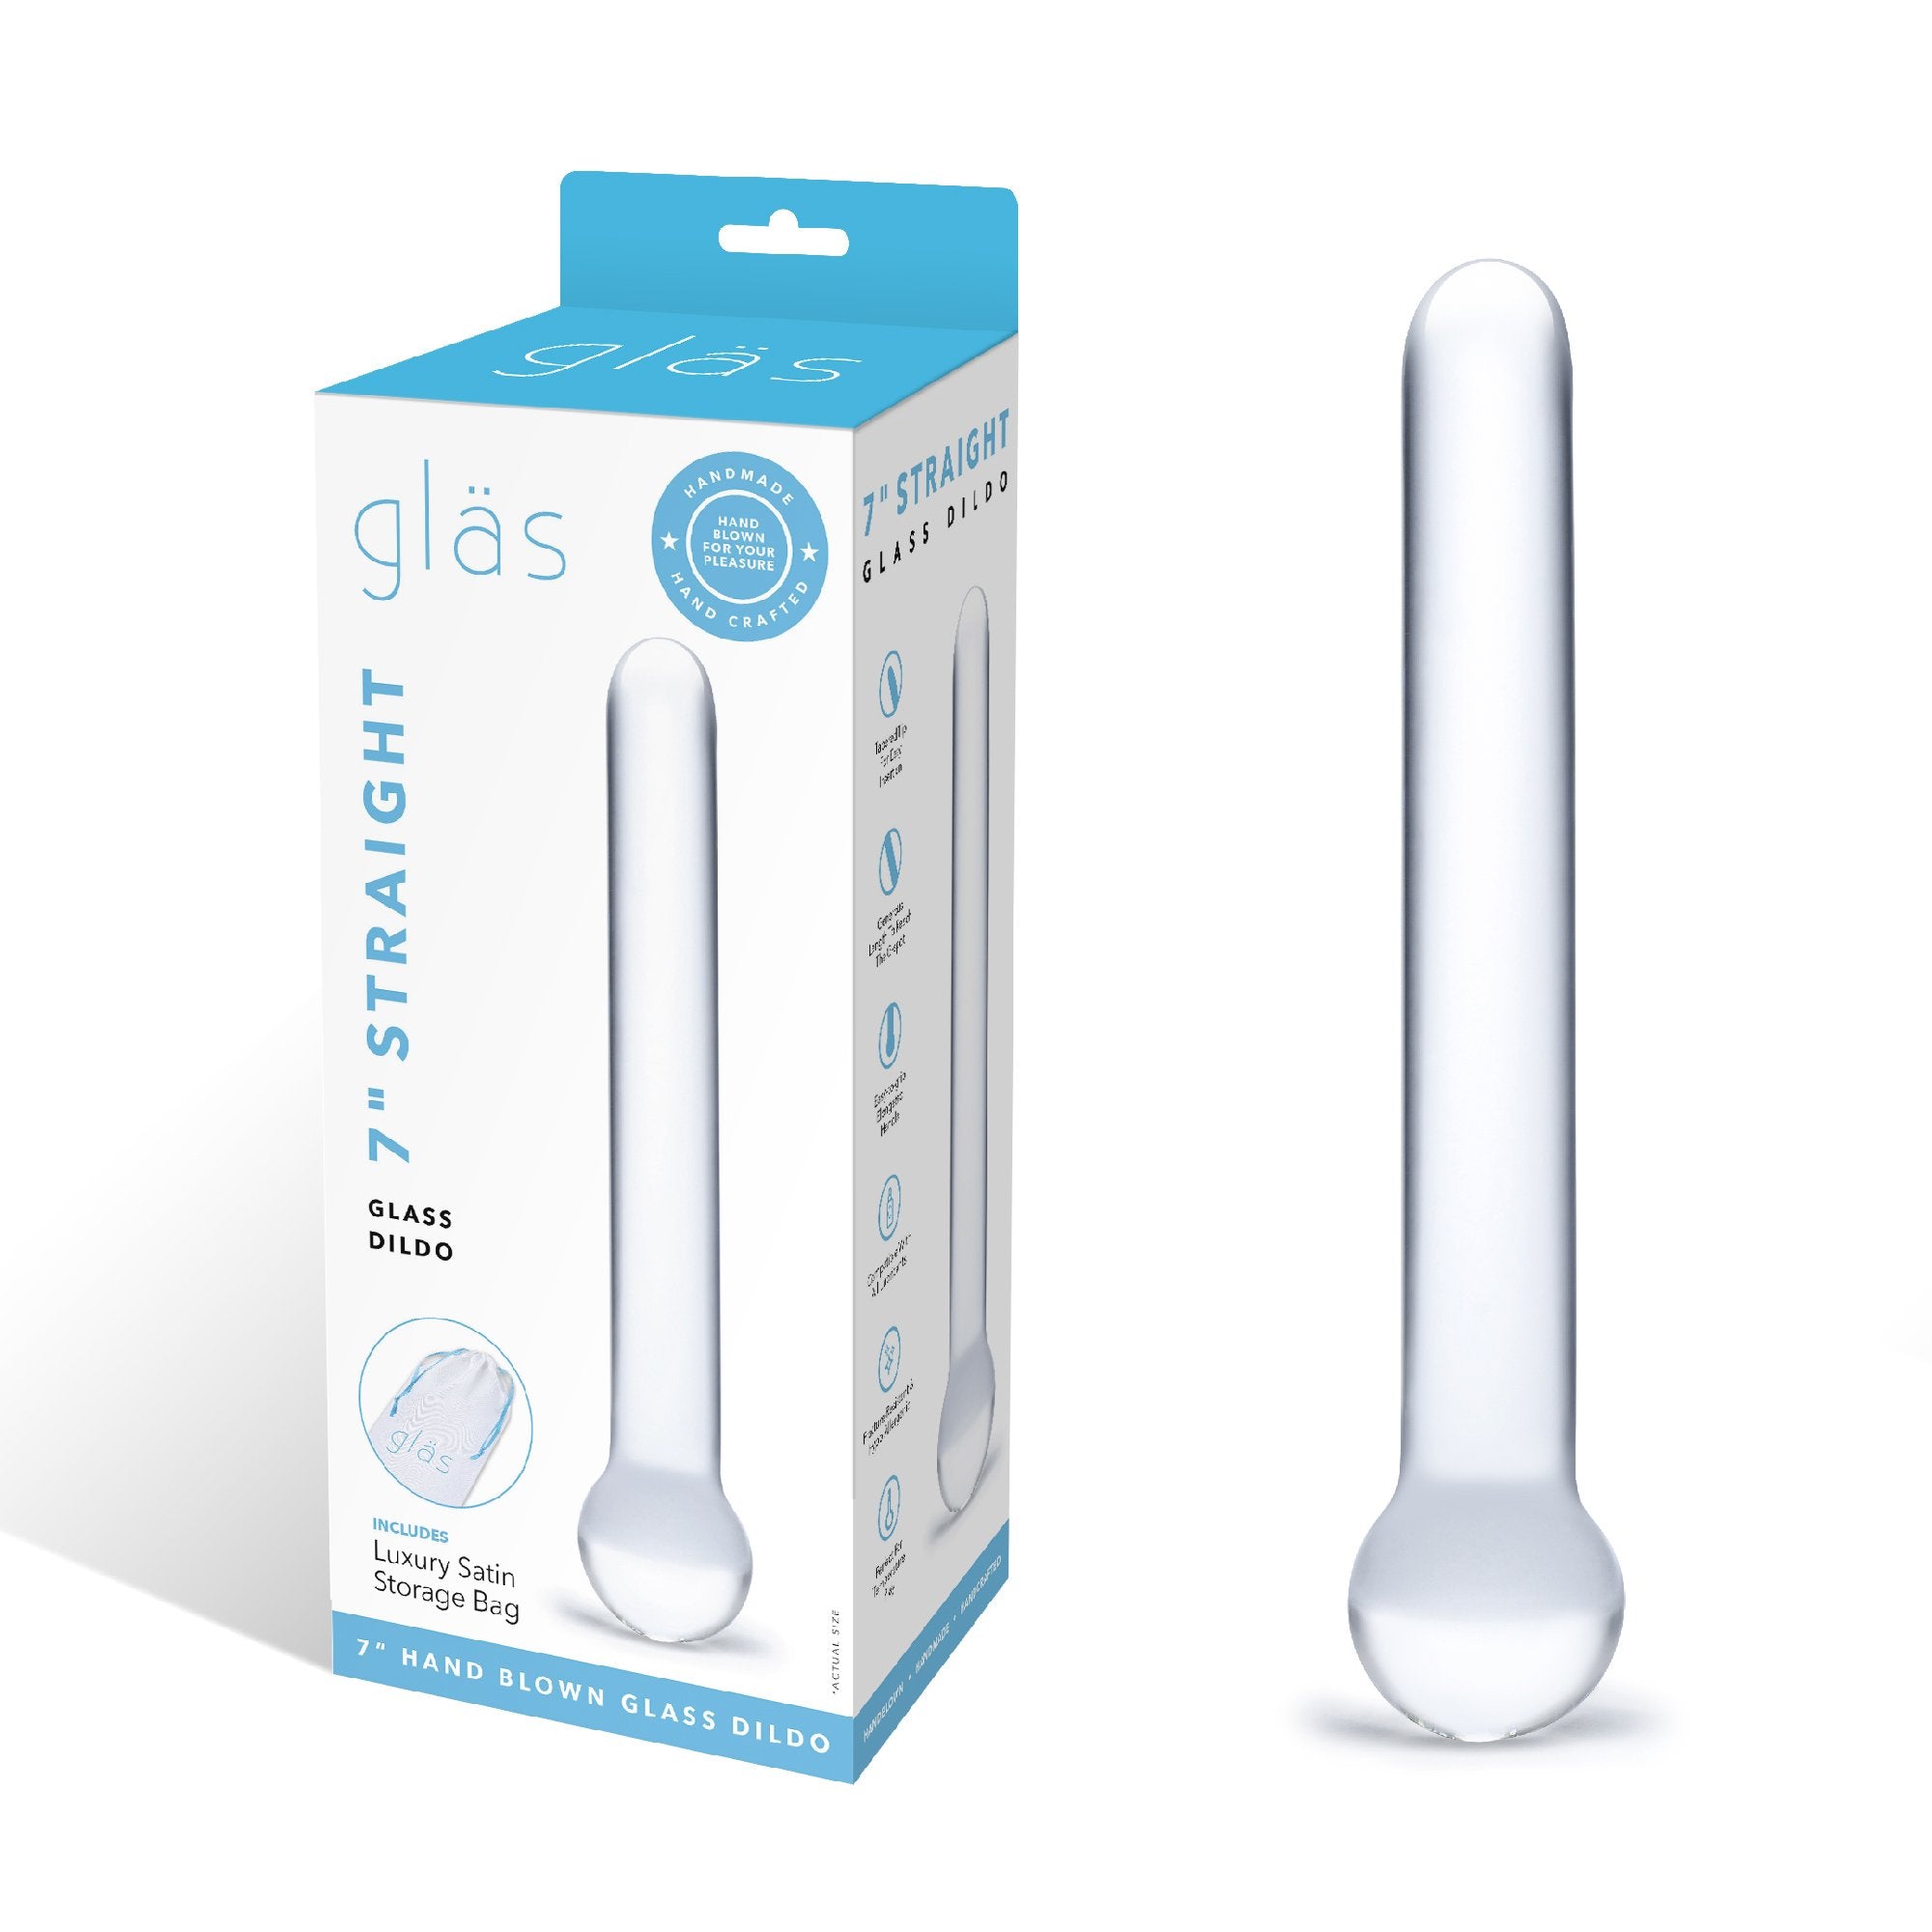 Packaging of the Gläs 7 inch Straight Glass Dildo